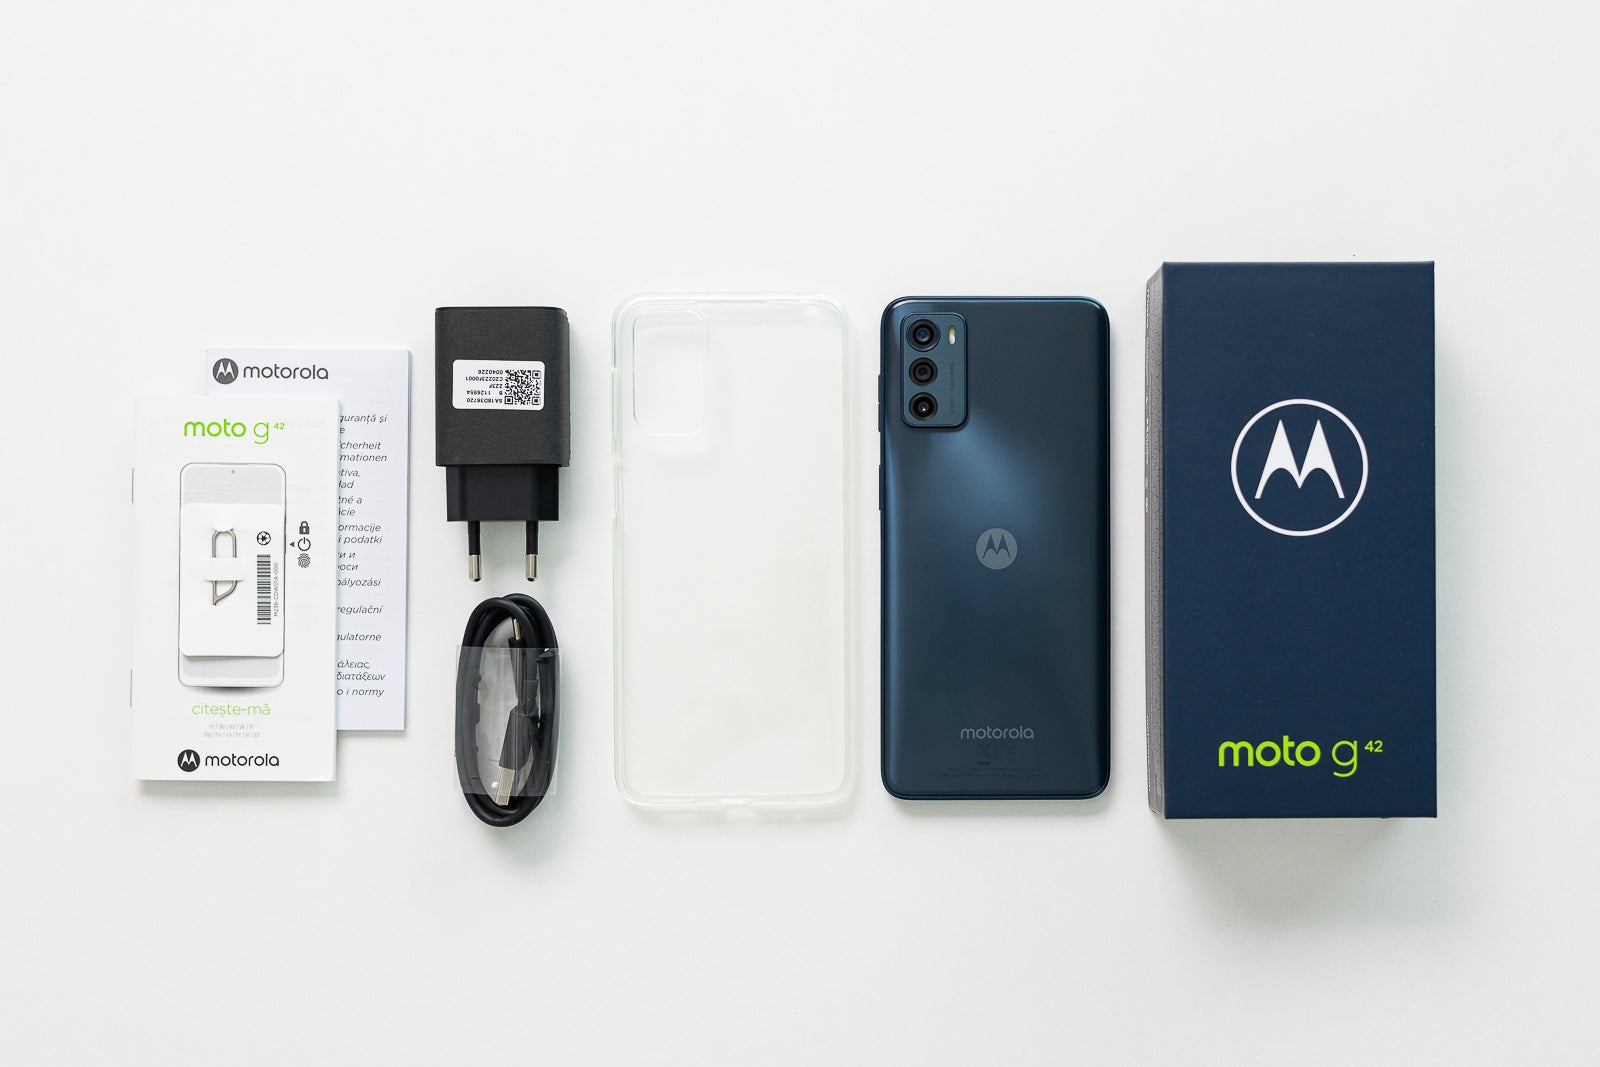 (Image credit - PhoneArena) This is everything inside the Moto G42 box. - Motorola Moto G42 review